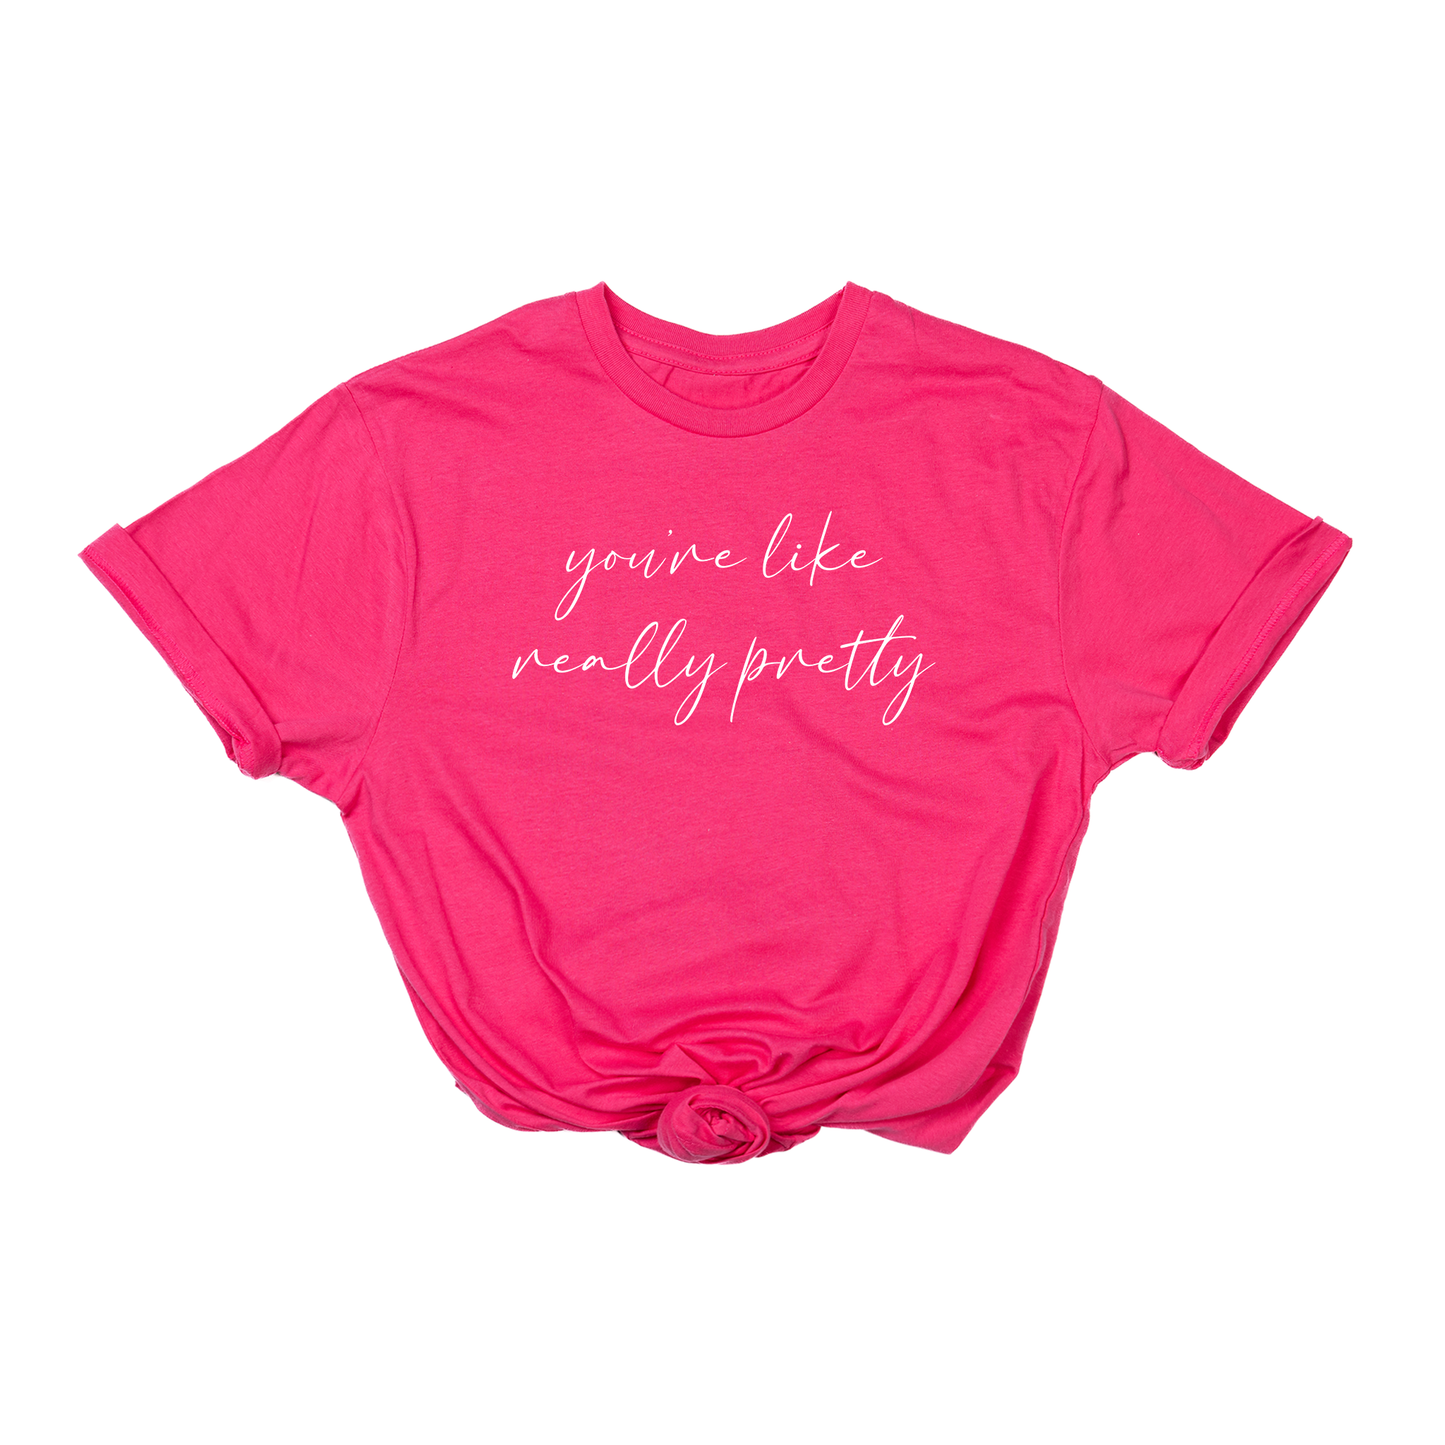 You're like really pretty (White) - Tee (Hot Pink)